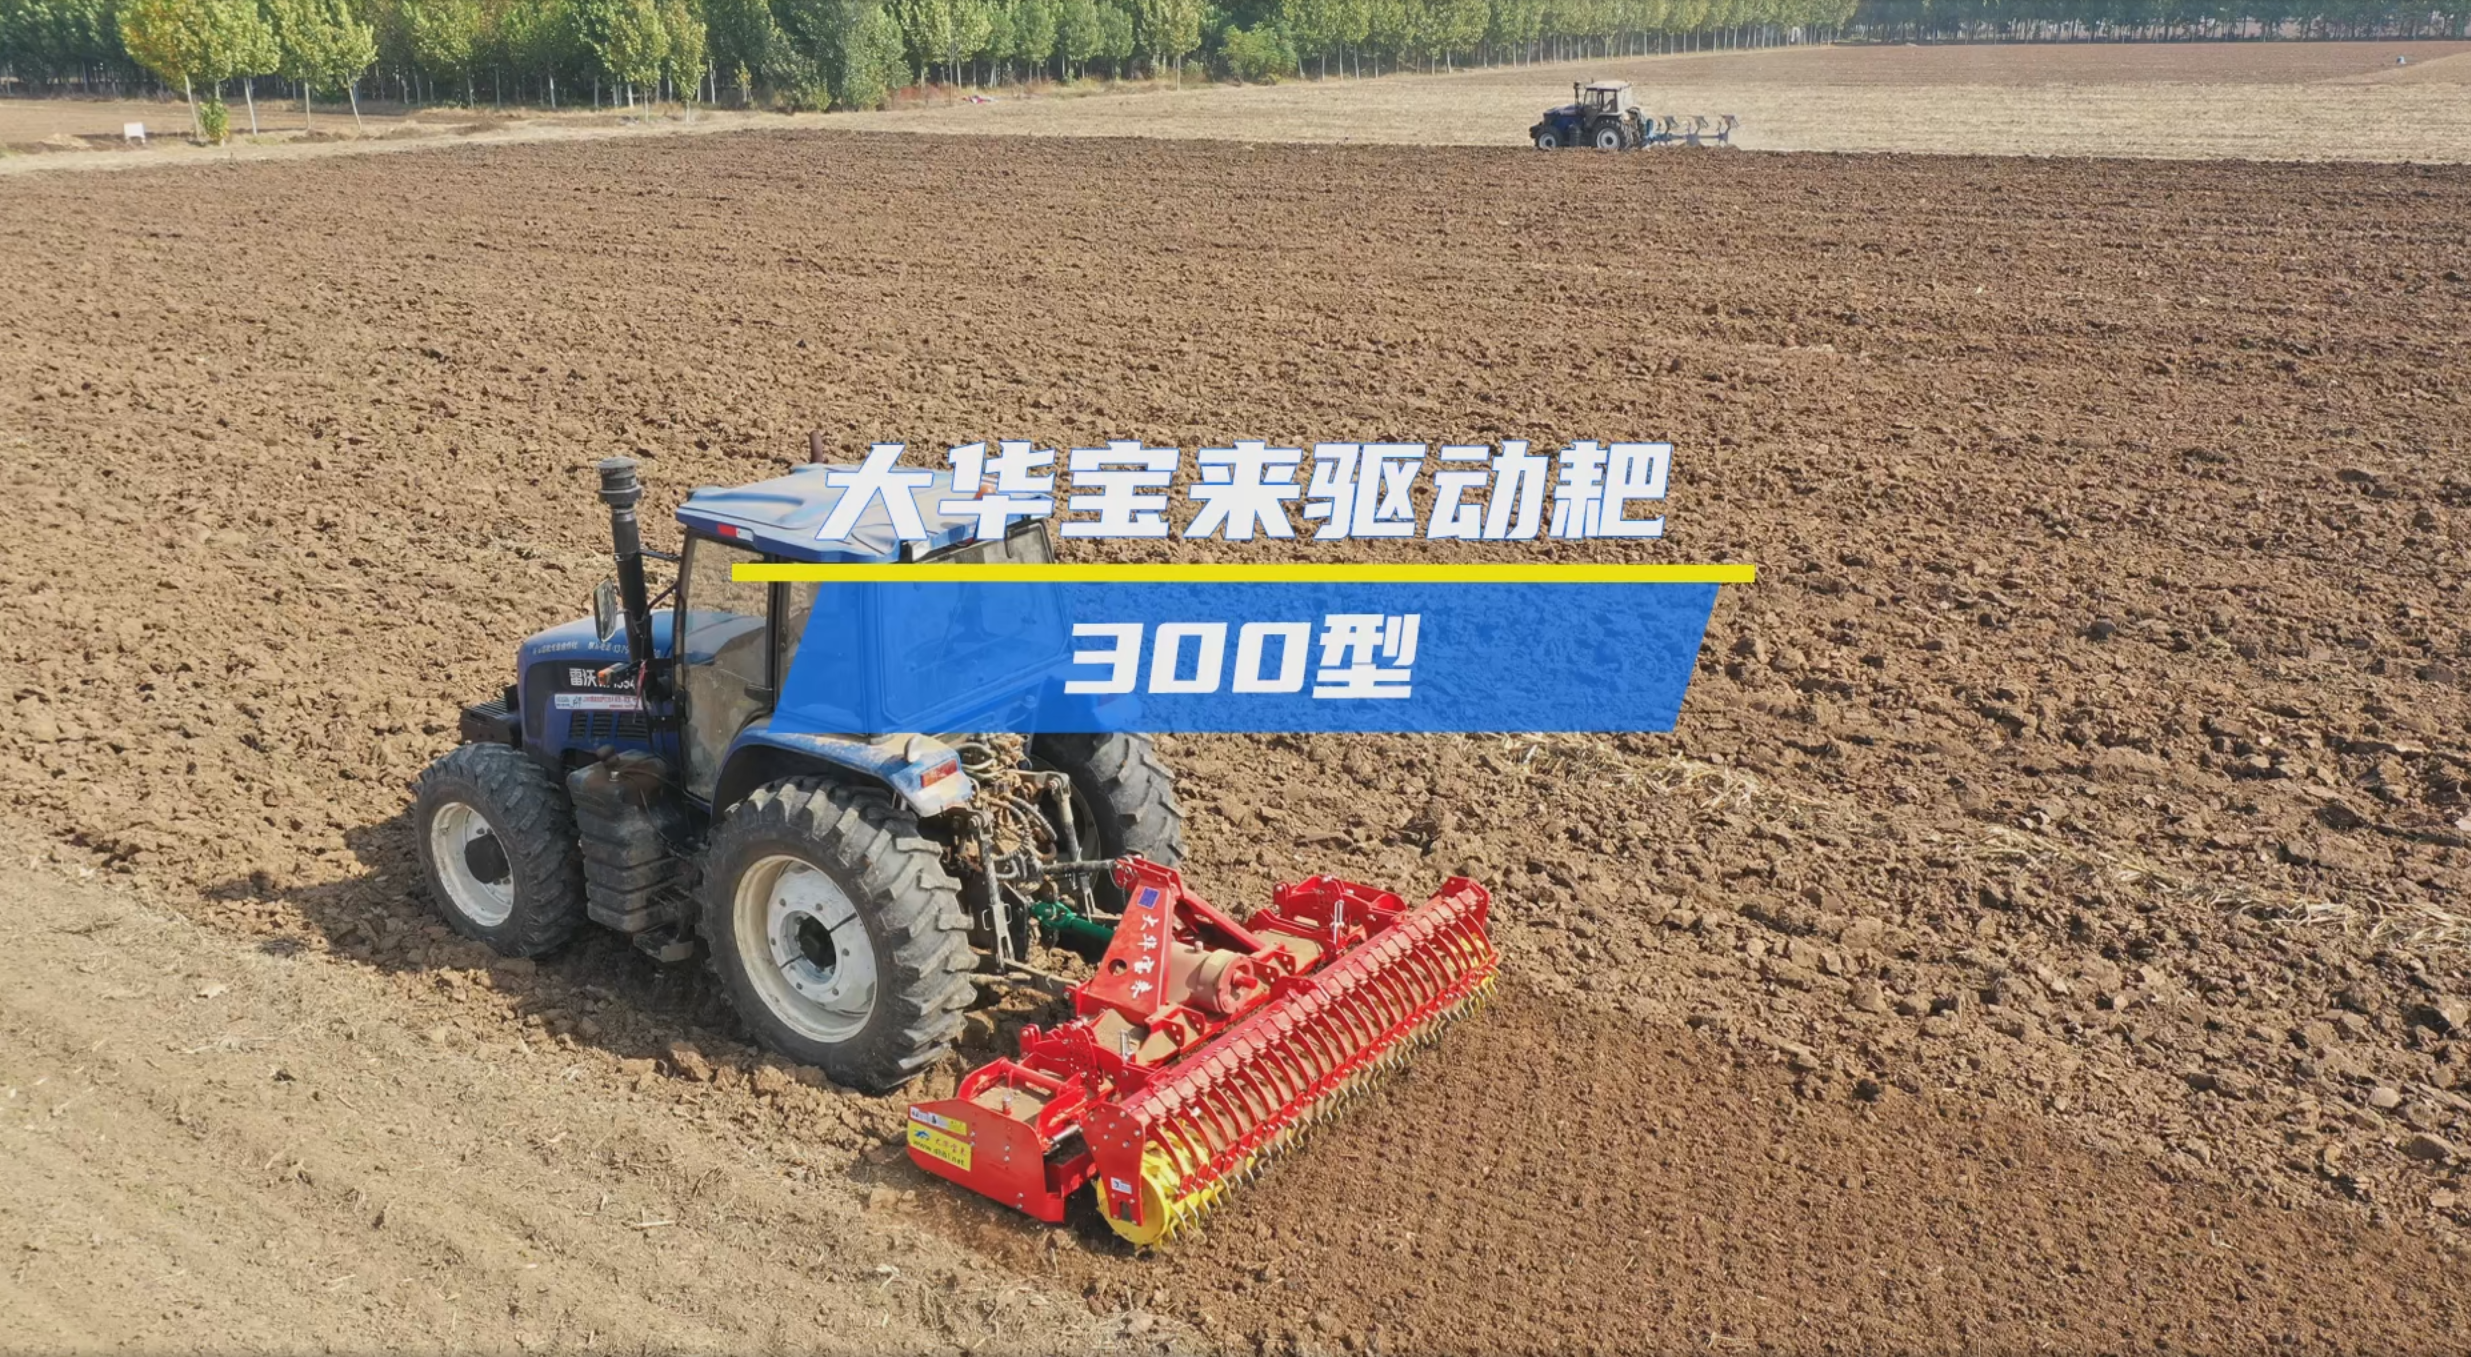 Power harrow for matching high-power tractors